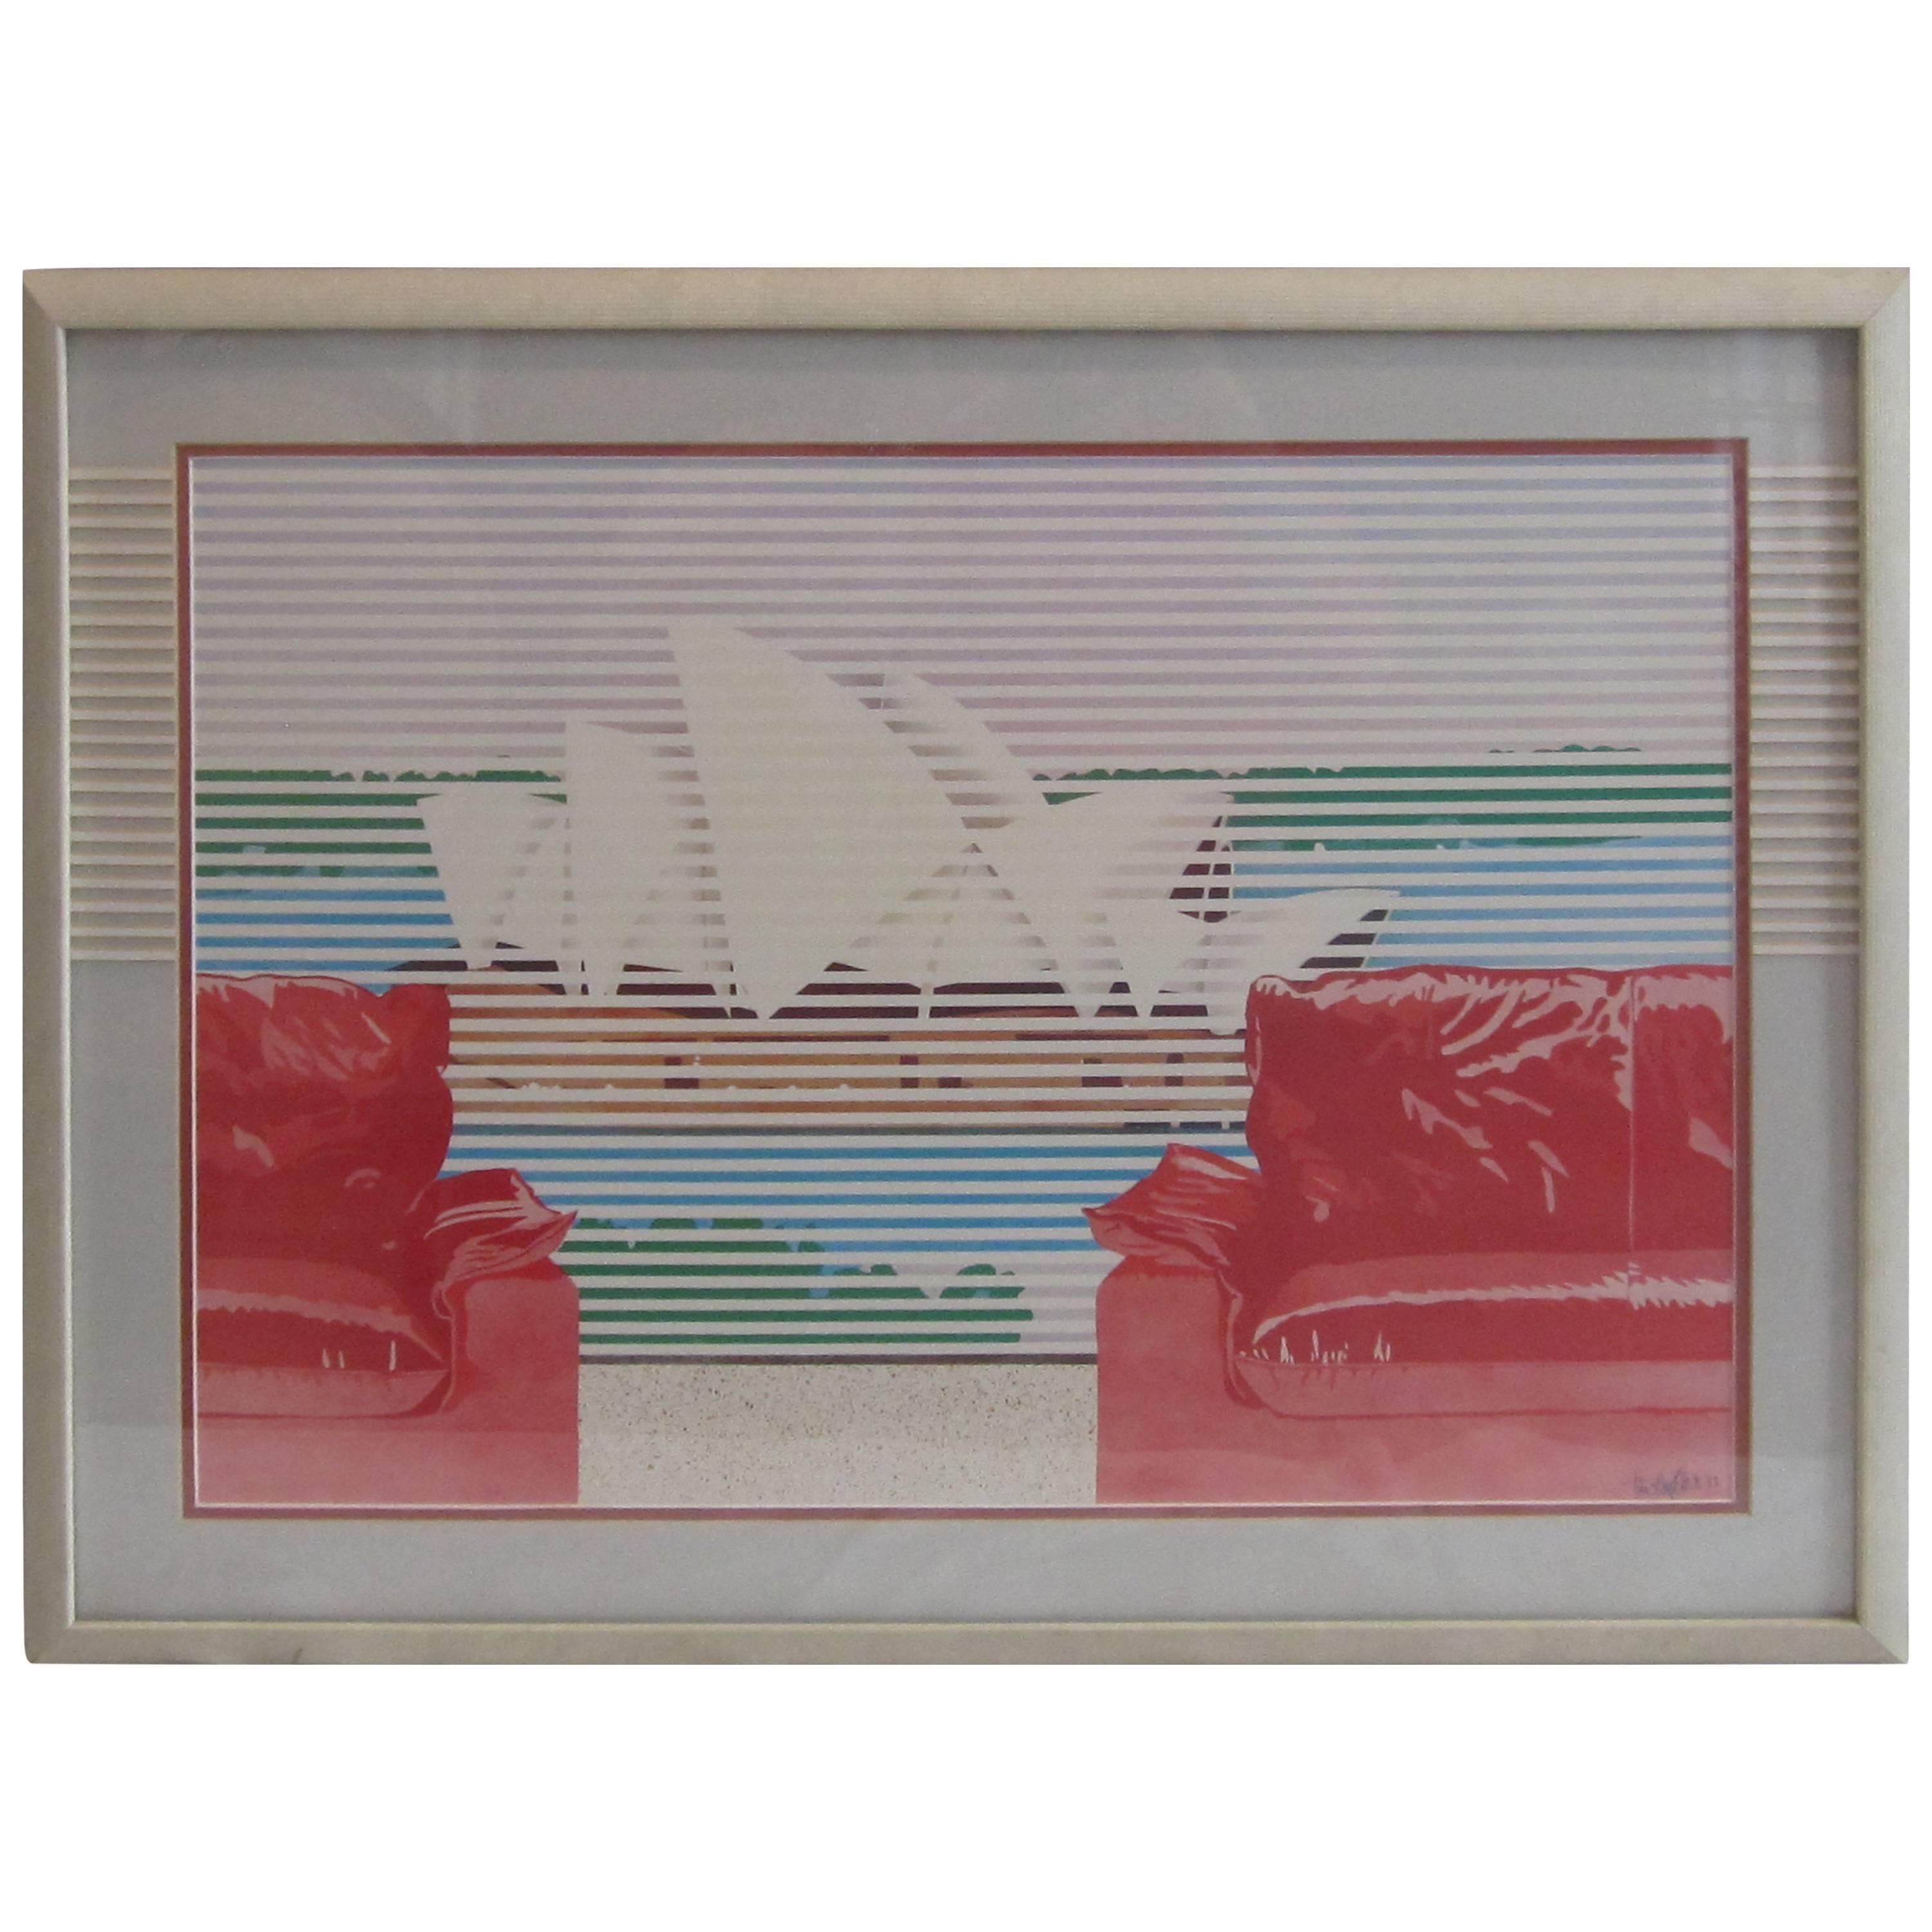 Still Life Print with Sydney Opera House by Timothy Birch For Sale